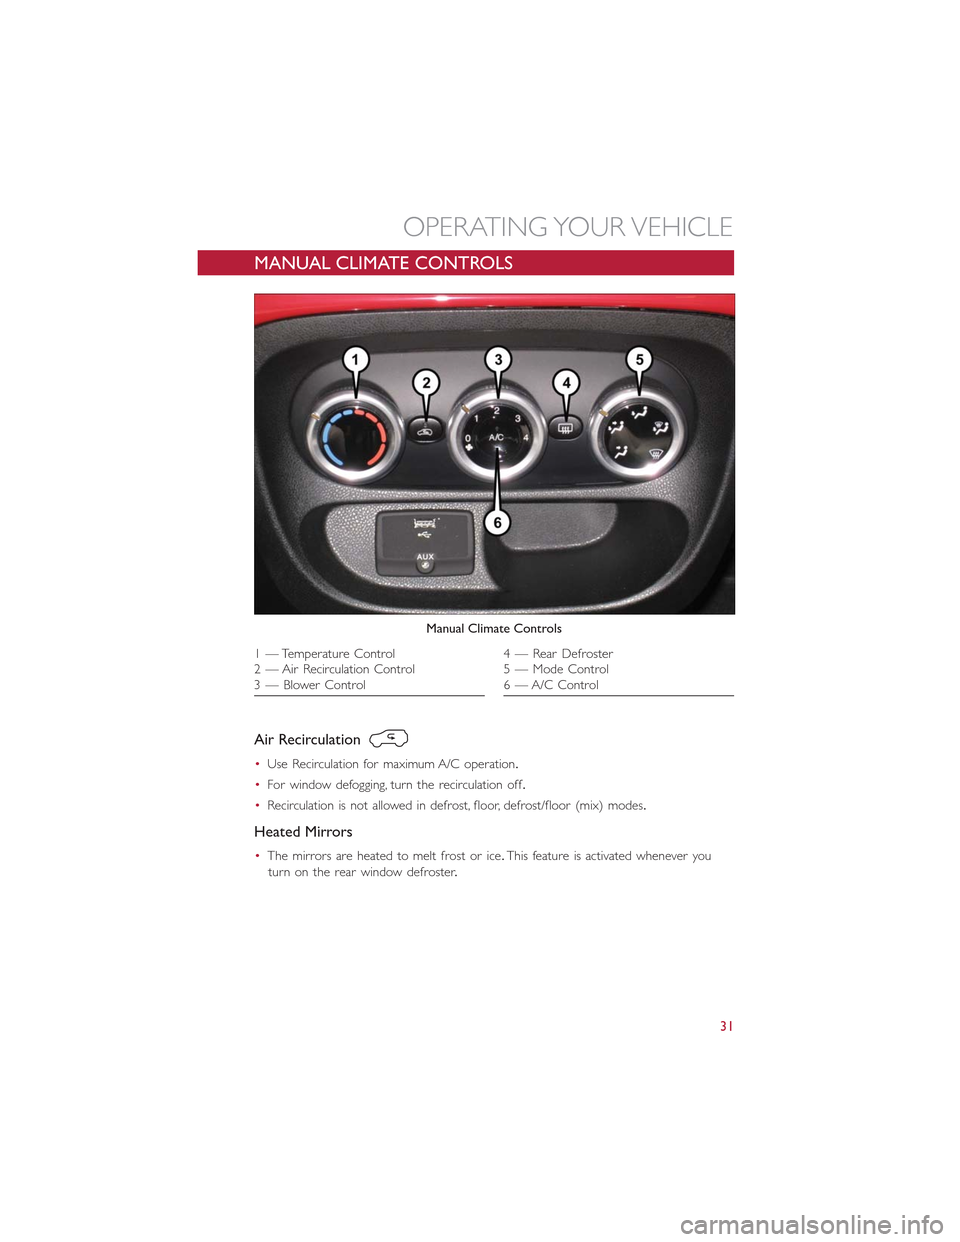 FIAT 500L 2015 2.G User Guide MANUAL CLIMATE CONTROLS
Air Recirculation
•Use Recirculation for maximum A/C operation.
•For window defogging, turn the recirculation off.
•Recirculation is not allowed in defrost, floor, defros